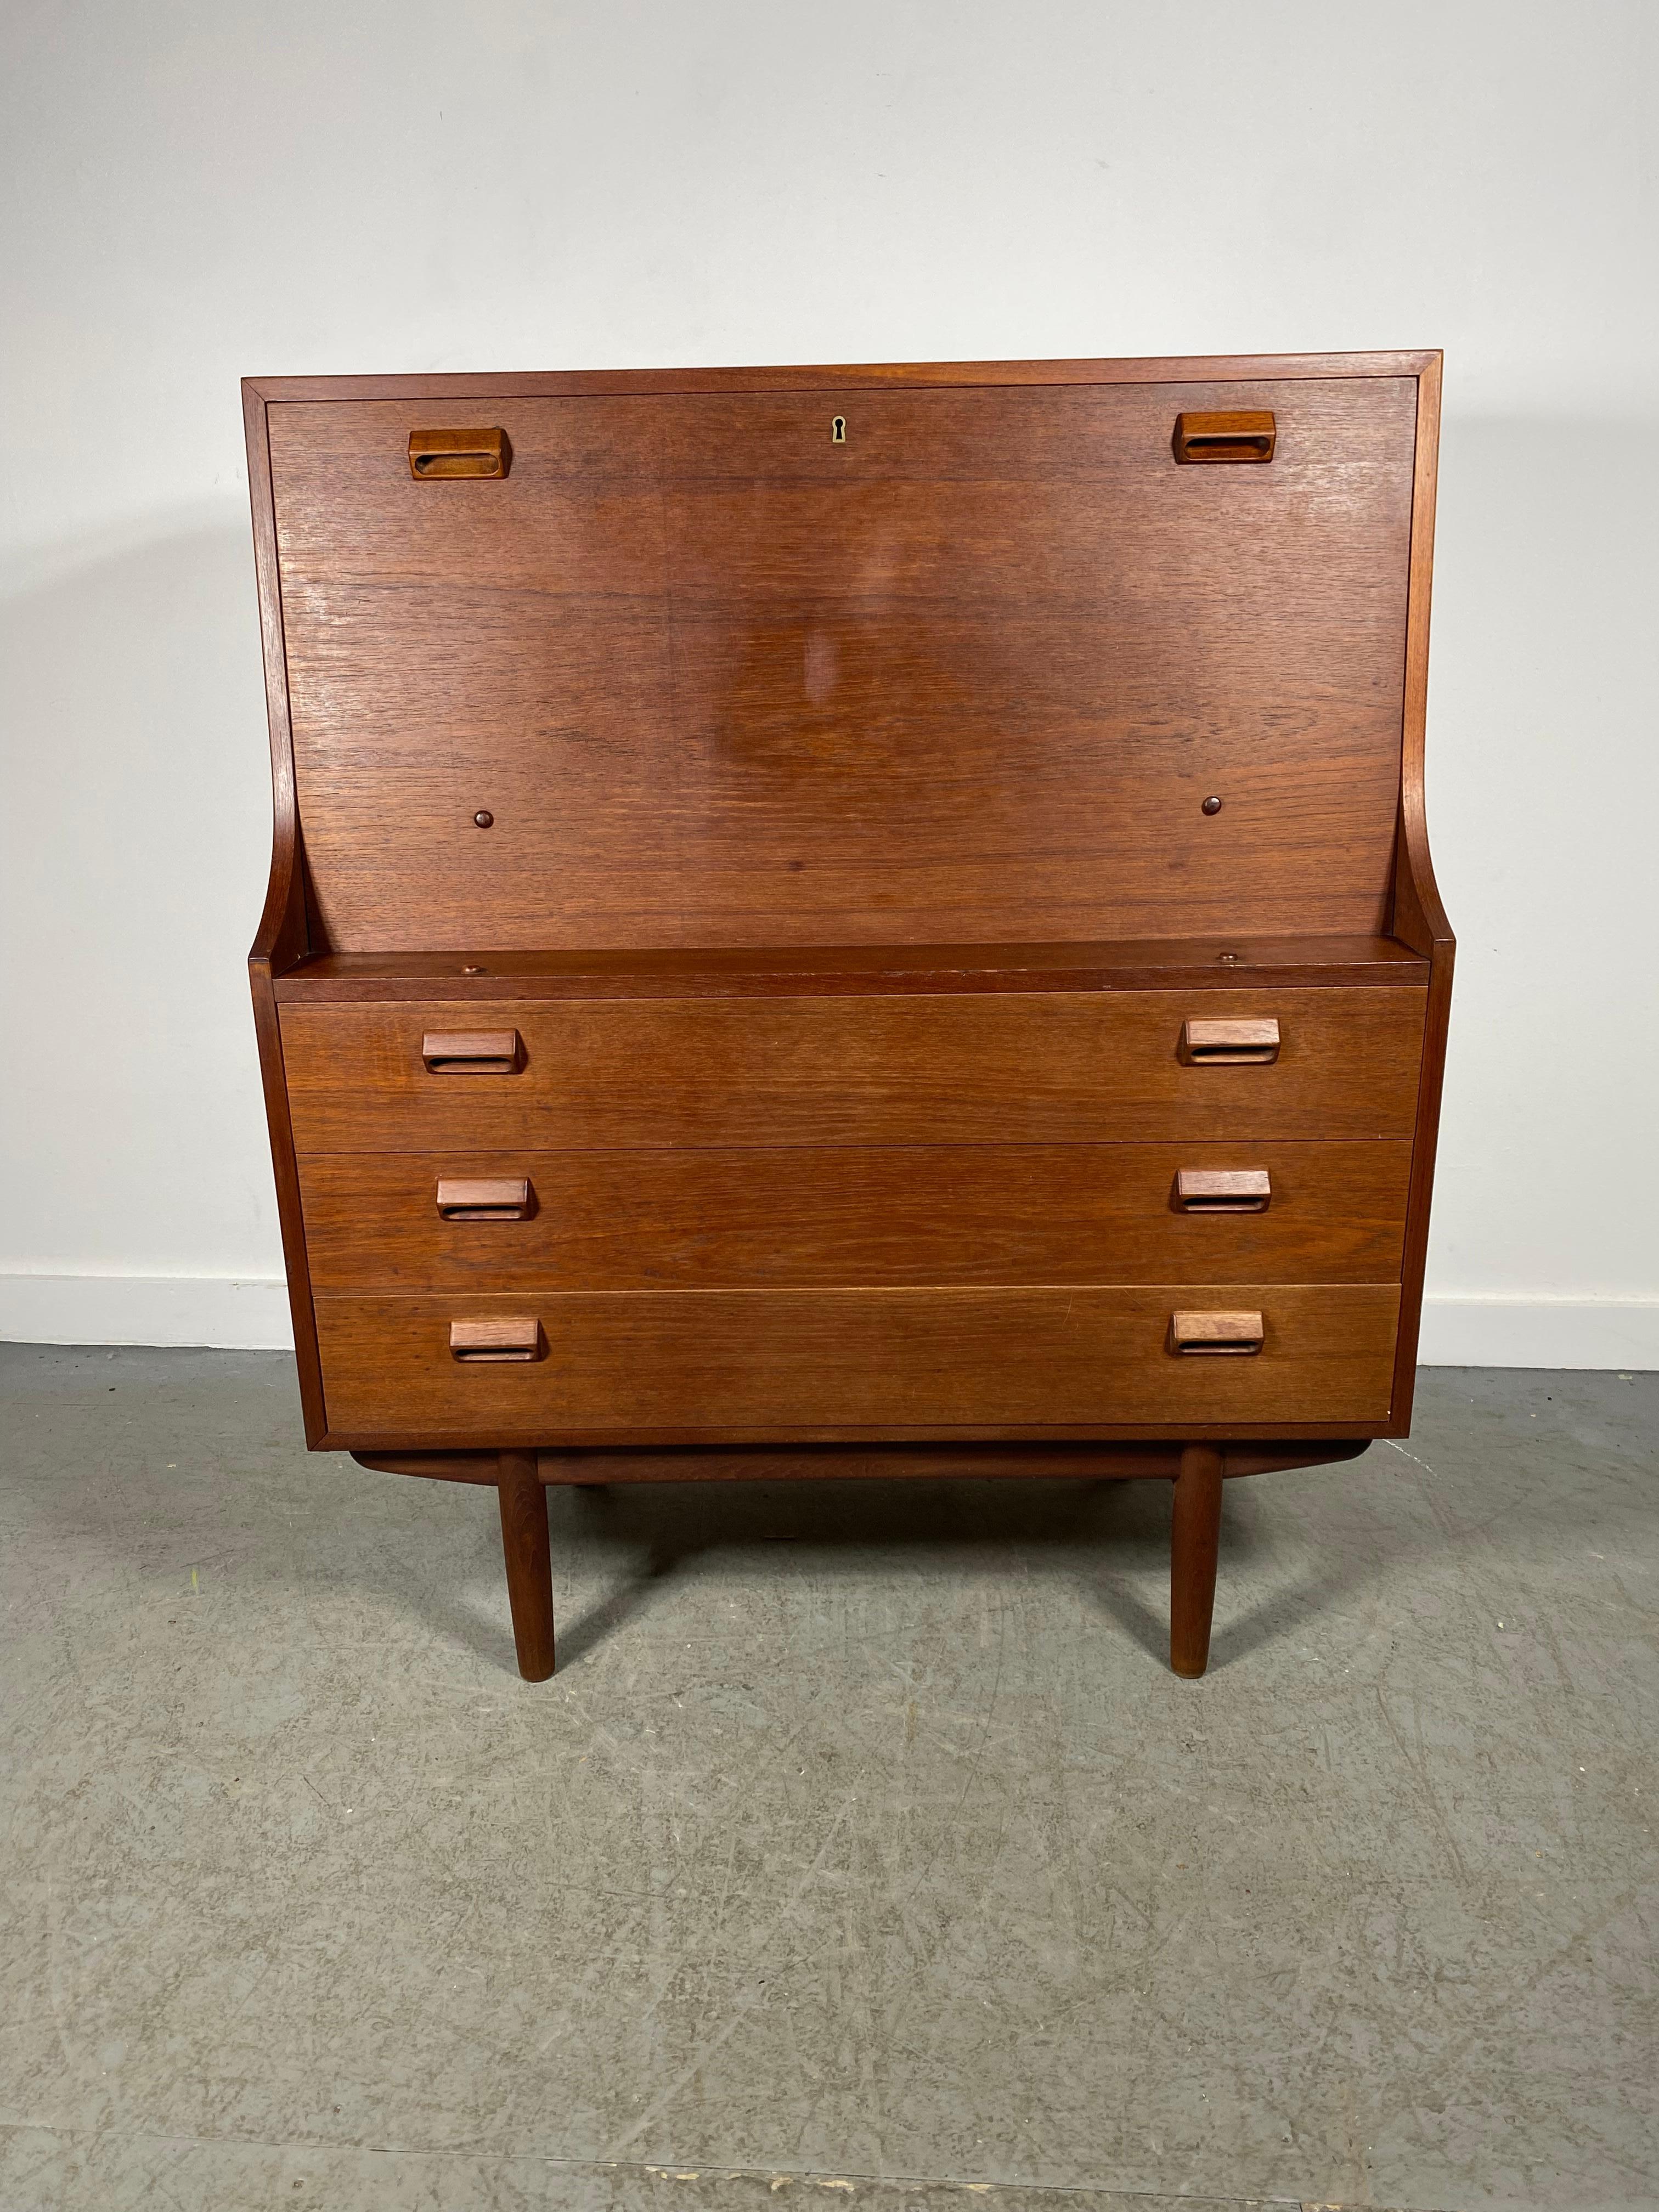 Mid century Borge Morgensen teak secretary desk is part desk, part storage. Bottom part has three drawers. Top leaf drops down into a writing surface. Multifunctional and elegant, this desk can serve as both a desk and an entryway piece. Great